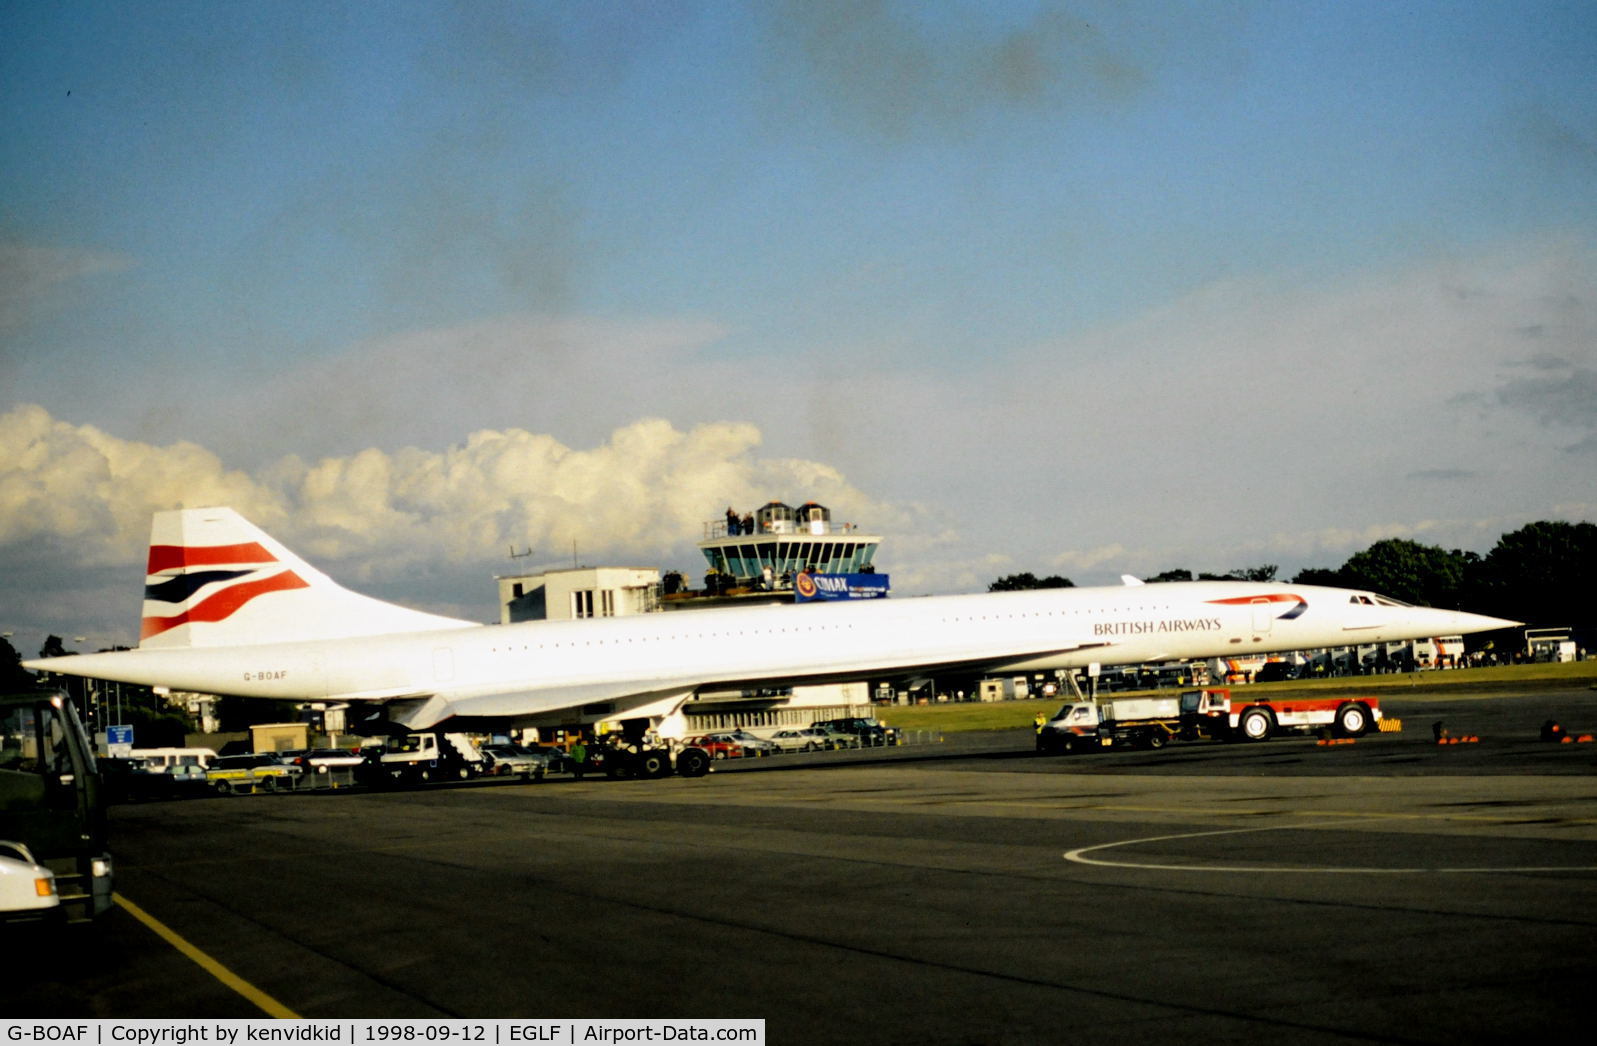 G-BOAF, 1979 Aerospatiale-BAC Concorde 1-102 C/N 100-016, Arrived early morning with some British Airways employees from Heathrow, waiting to take them back in the evening.